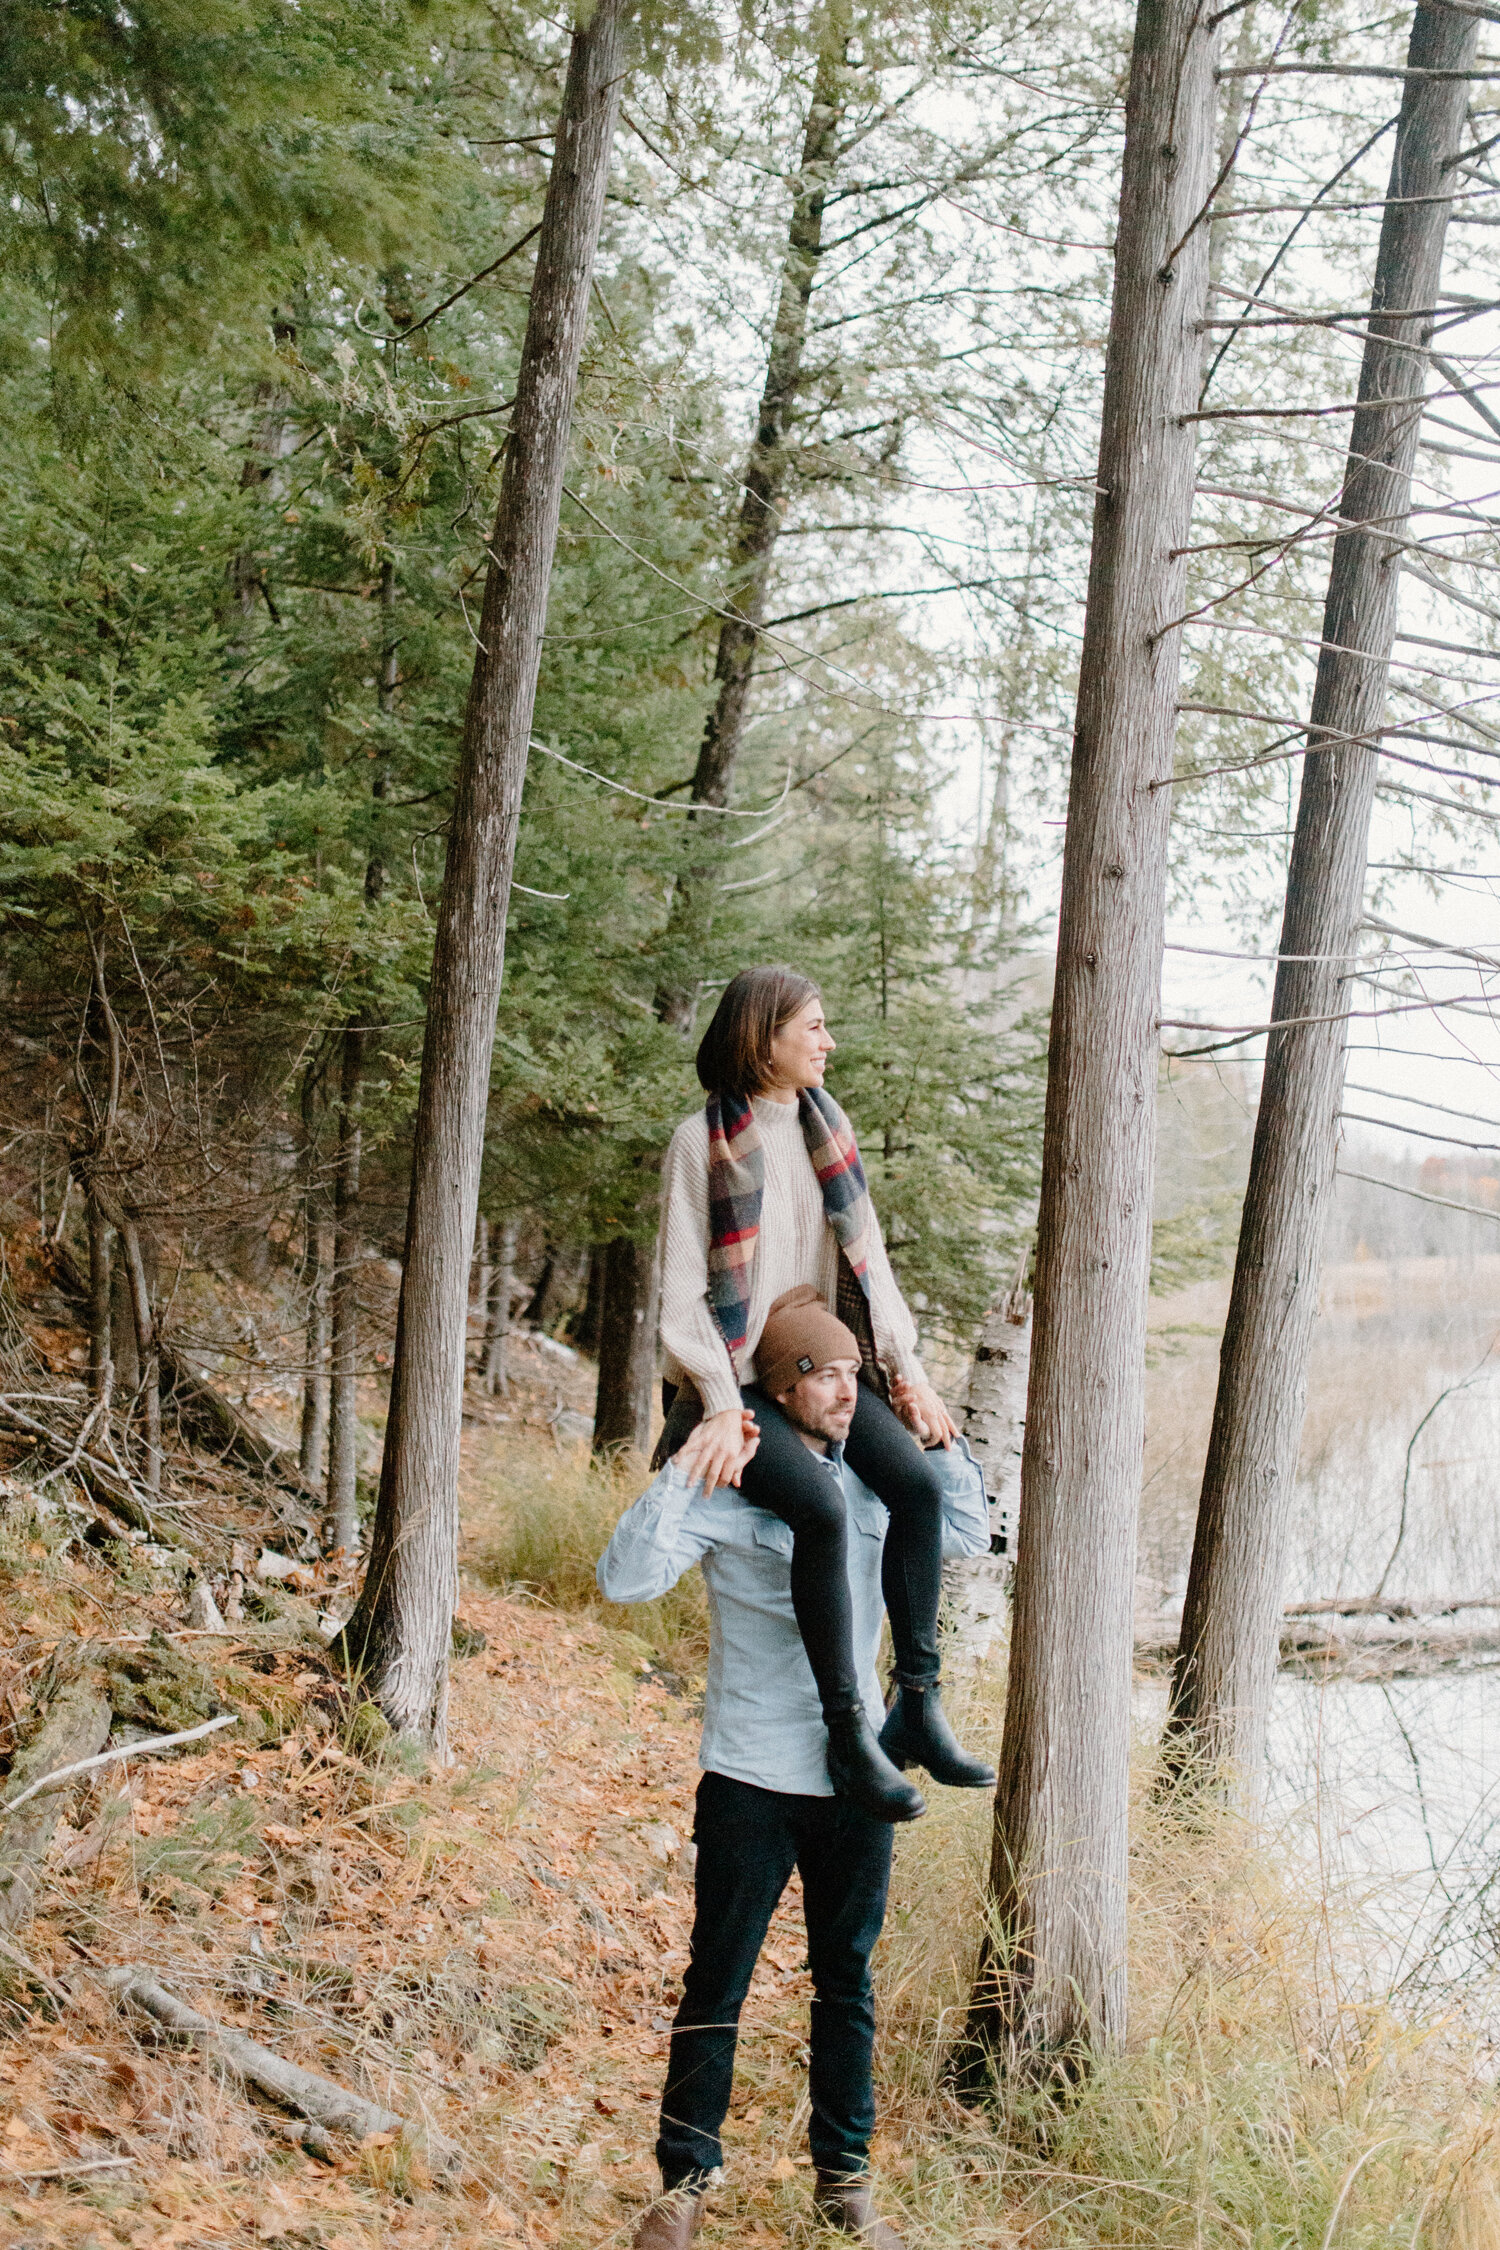  On the wooded shoreline of this Quebec, Canada lake, Chelsea Mason Photography captures a playful engagement session where this woman sits on her fiance’s shoulders. Woman sitting on fiance’s shoulders, playful piggy back ride, overcast autumn engag